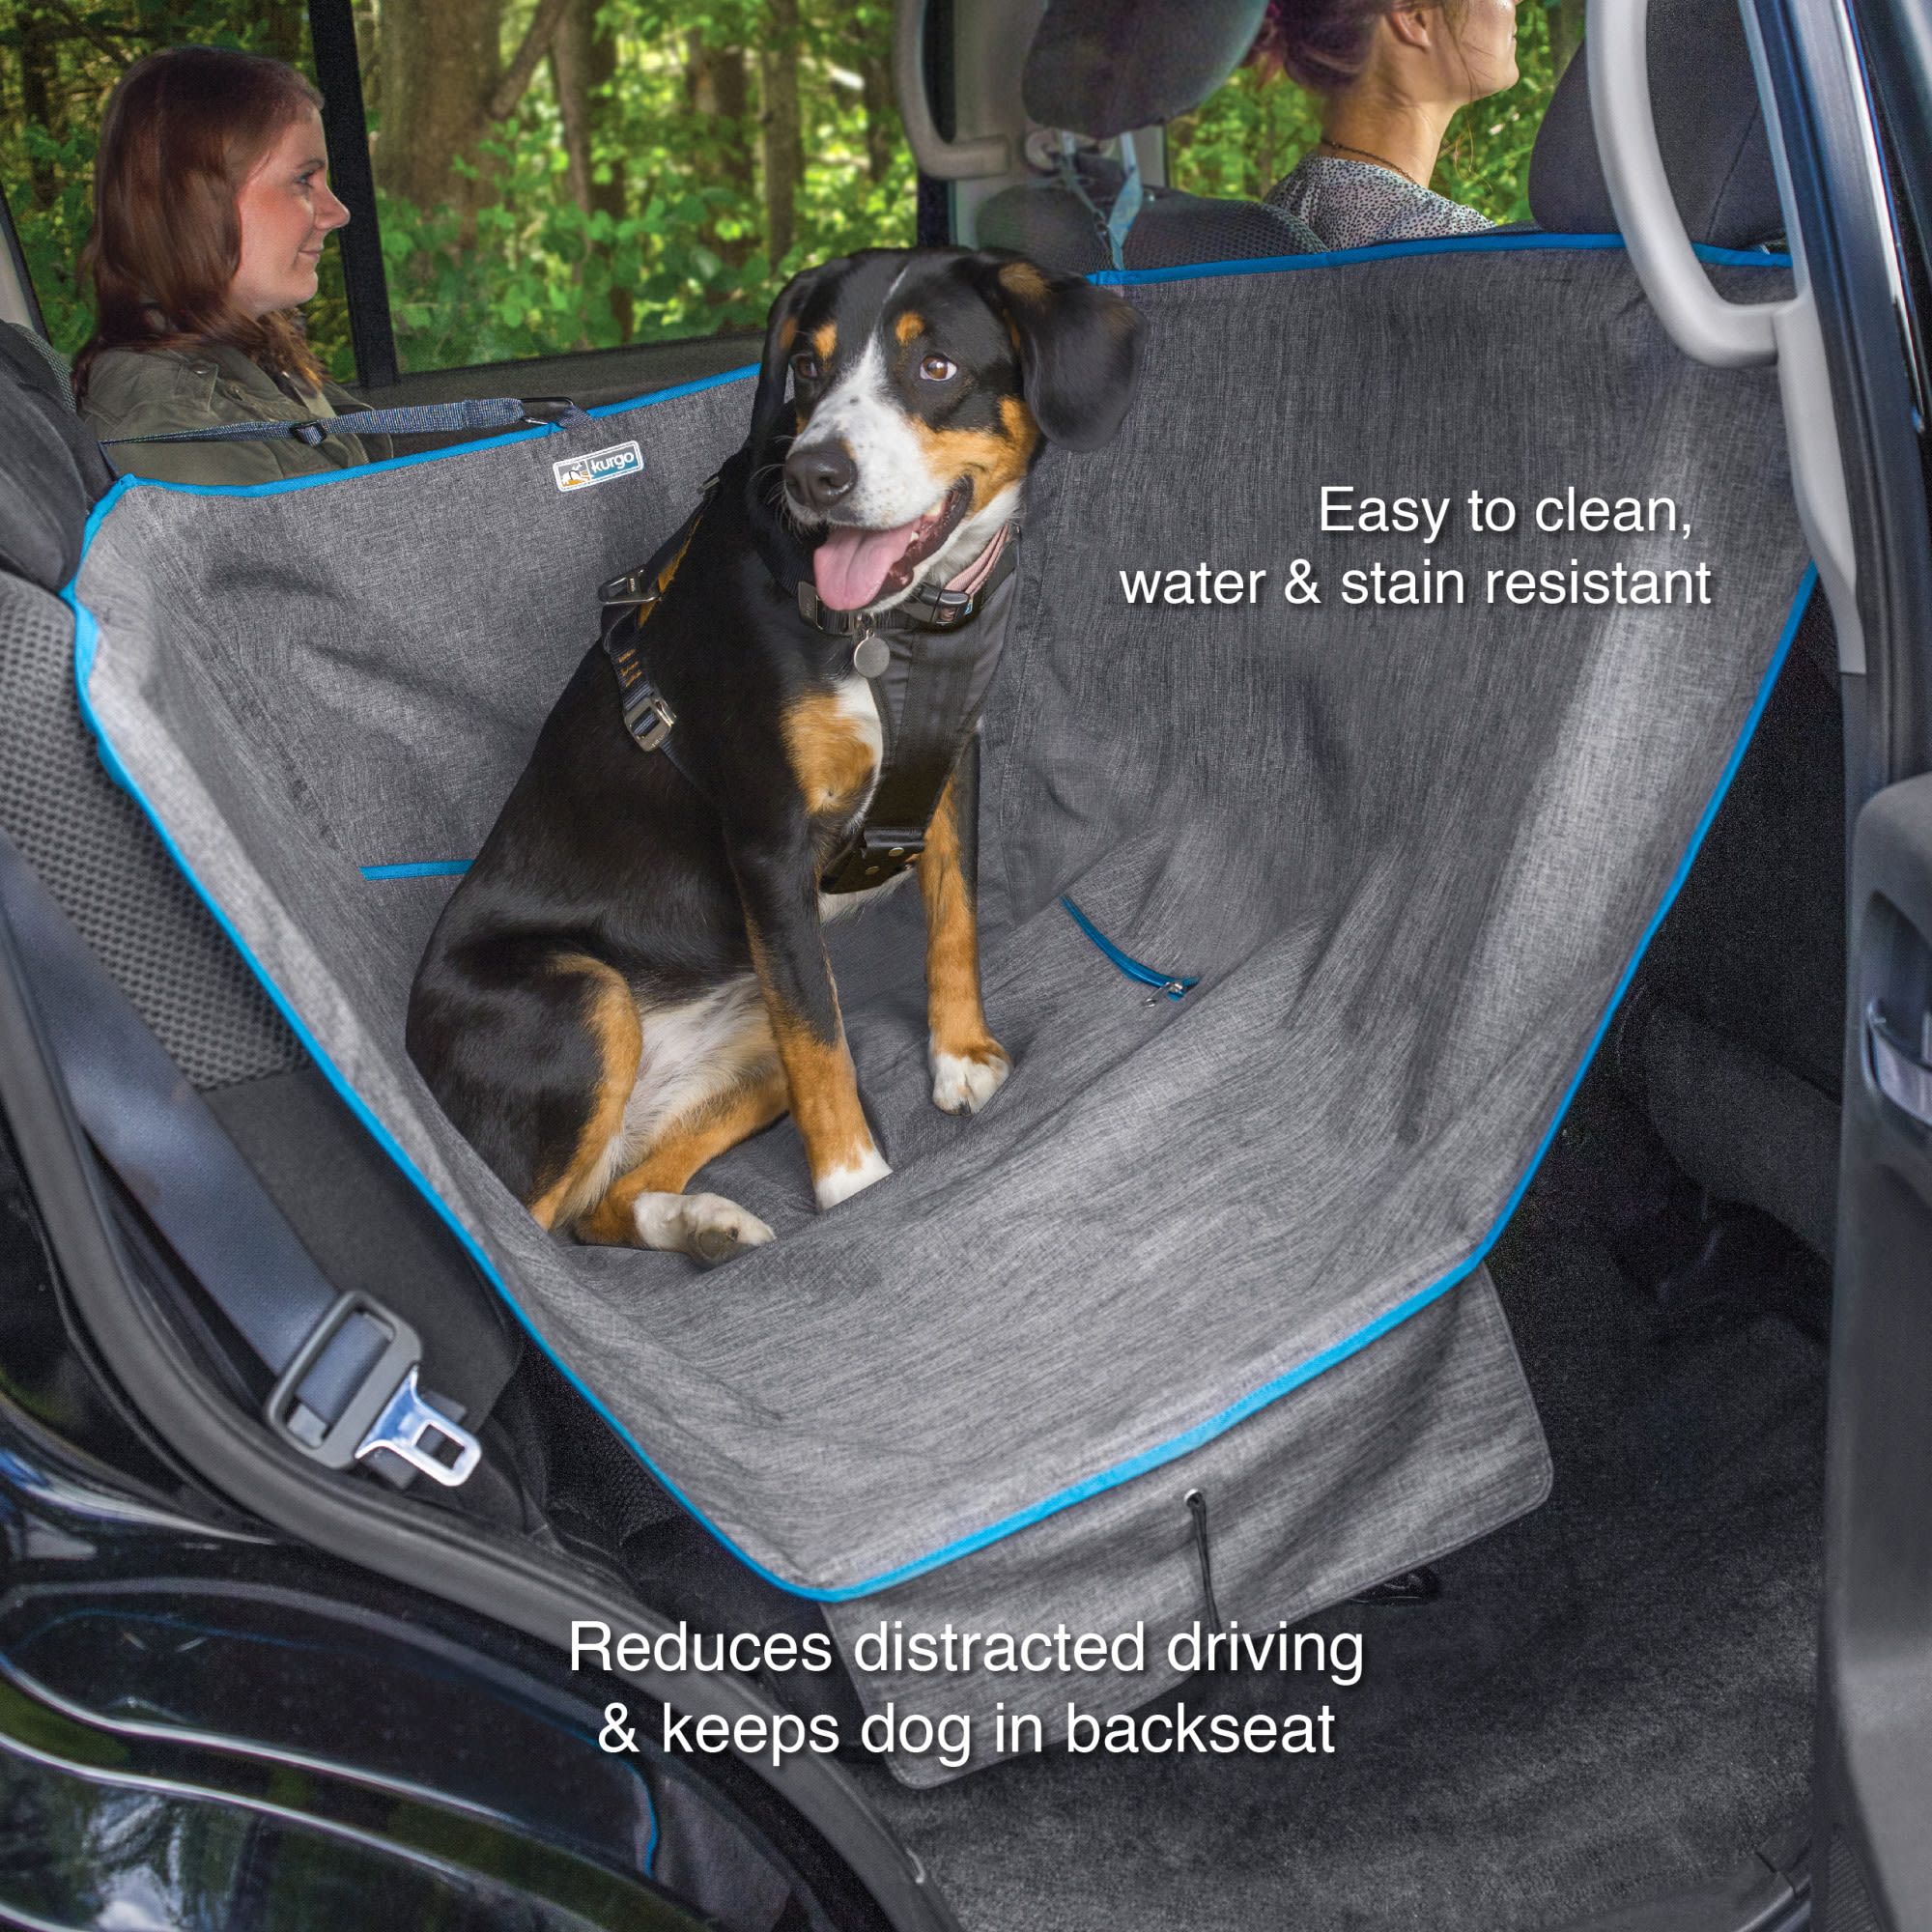 Here's our dog hammock seat cover for the back seat. The sides zip up to  protect the doors and you can lower the flap to protect the seat when the  dogs jump